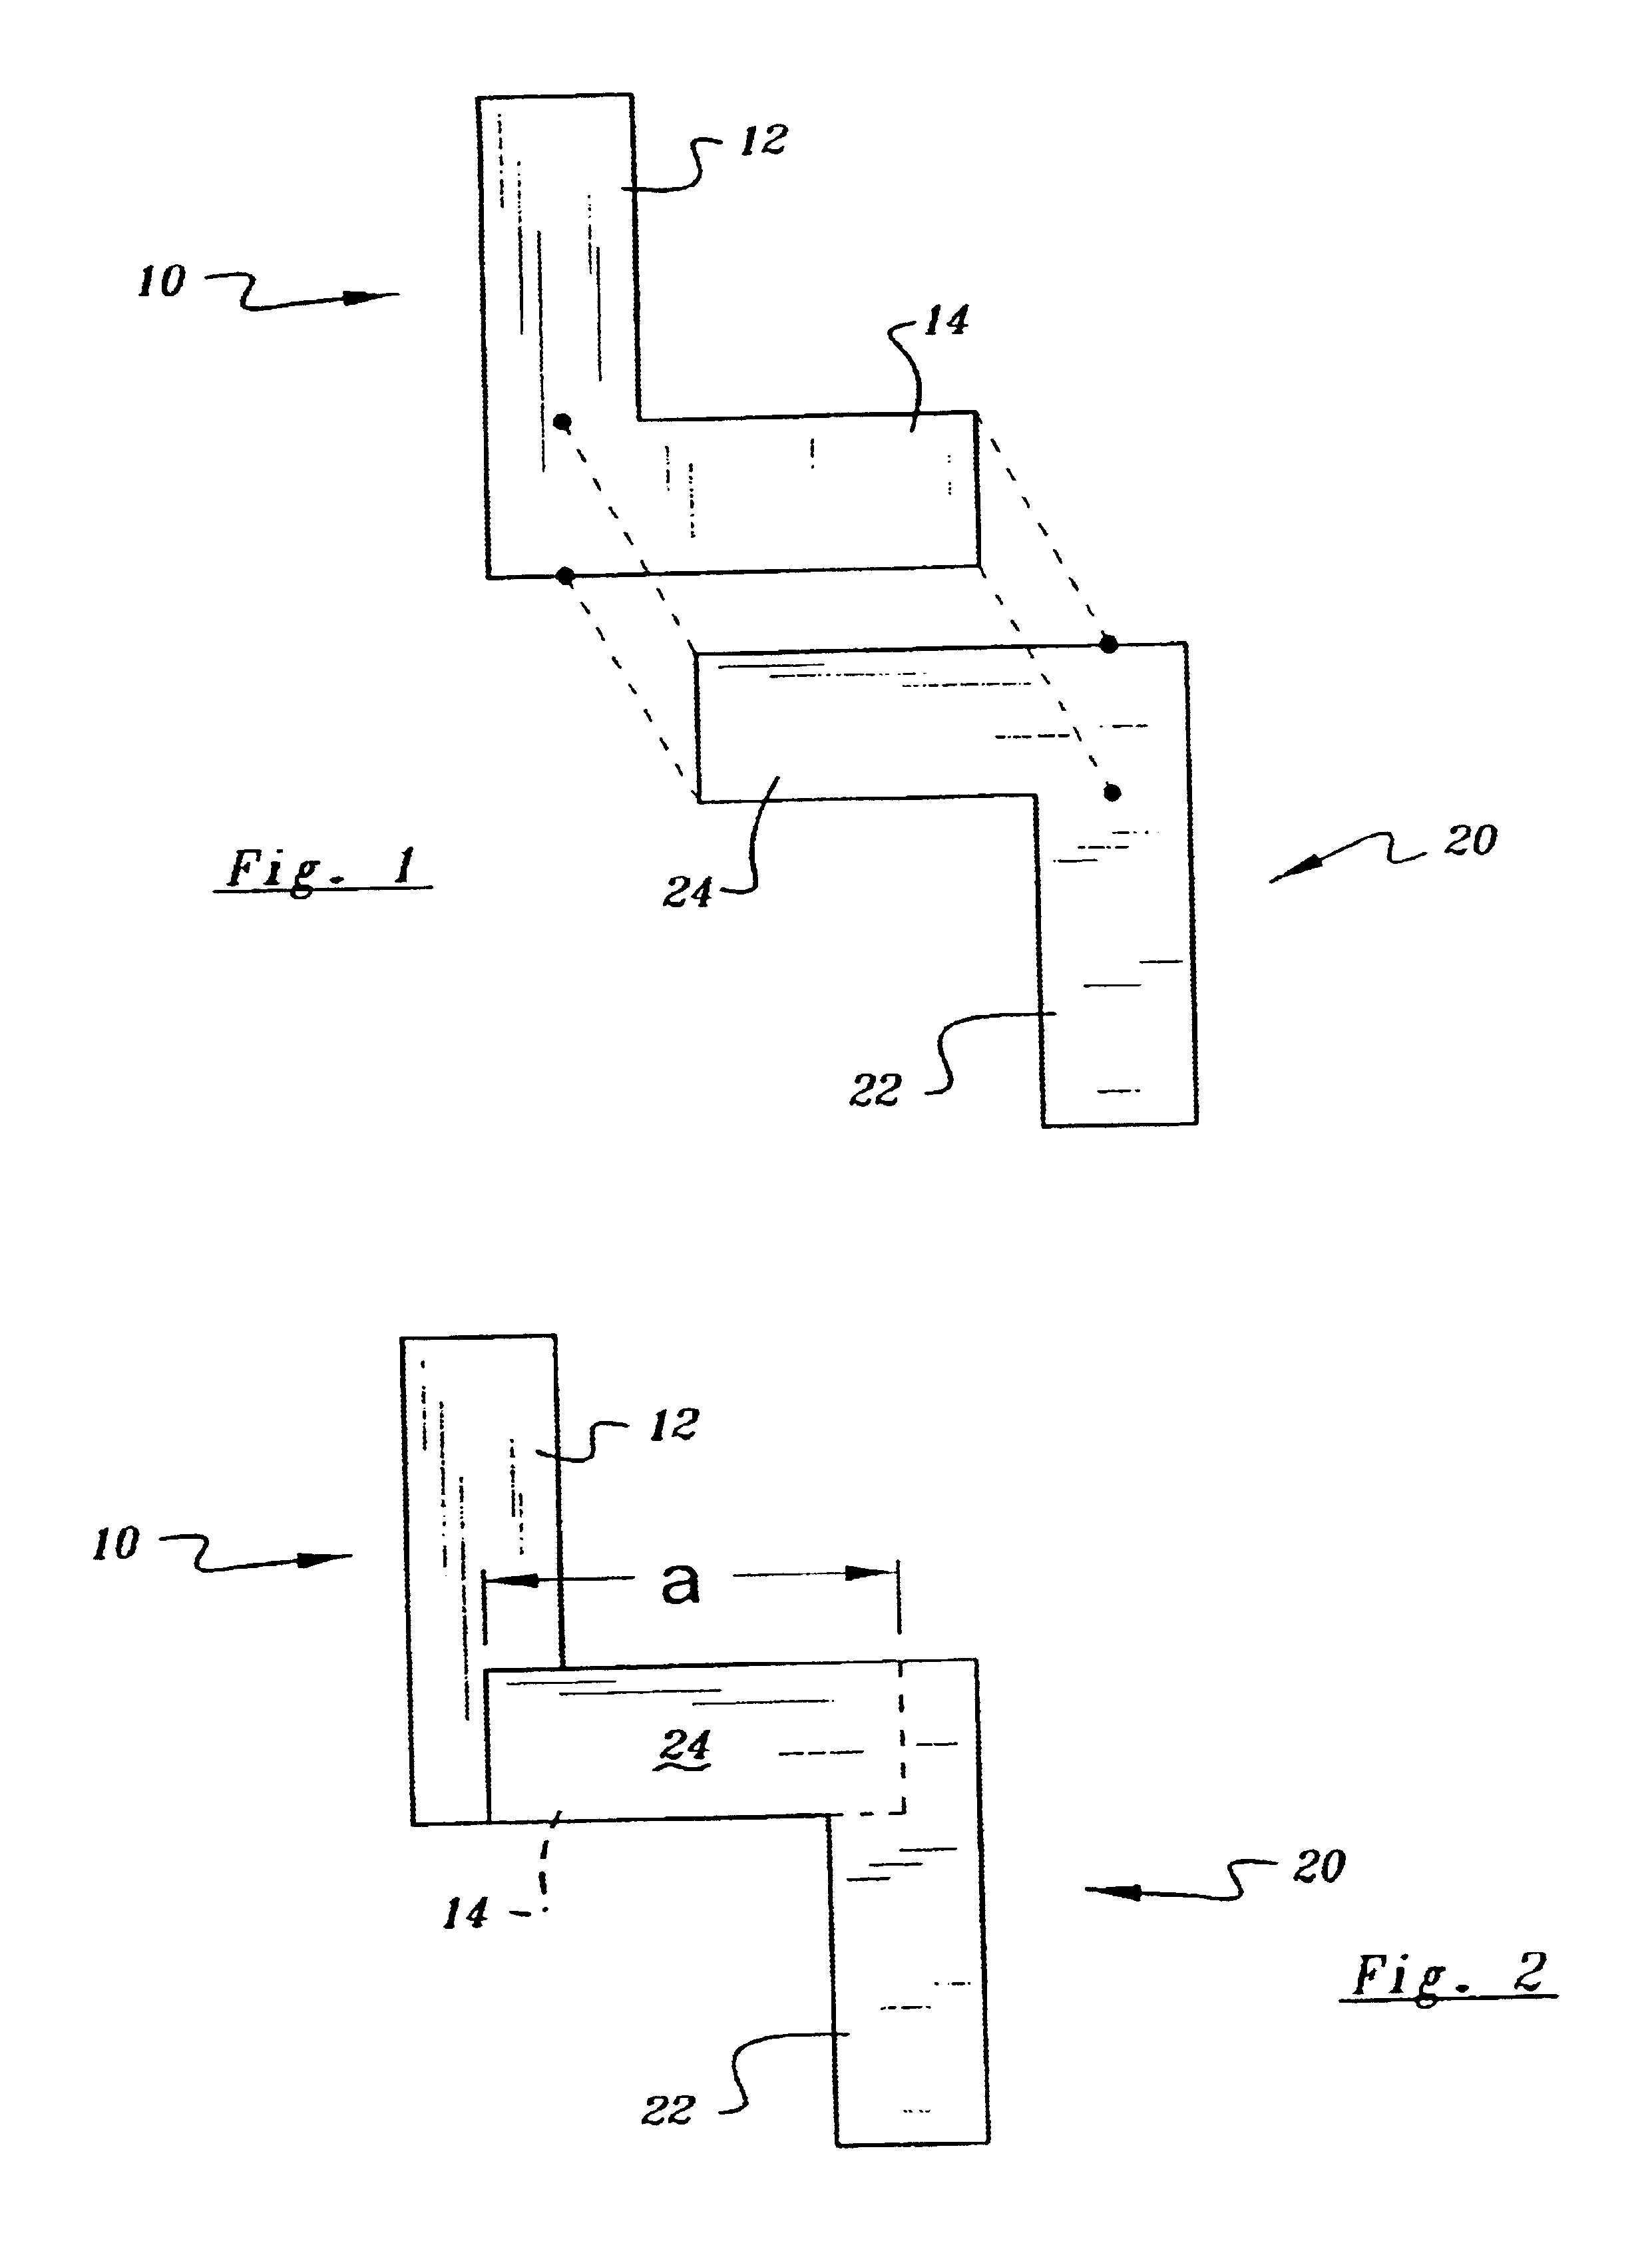 Method for performing monte-carlo simulations to predict overlay failures in integrated circuit designs